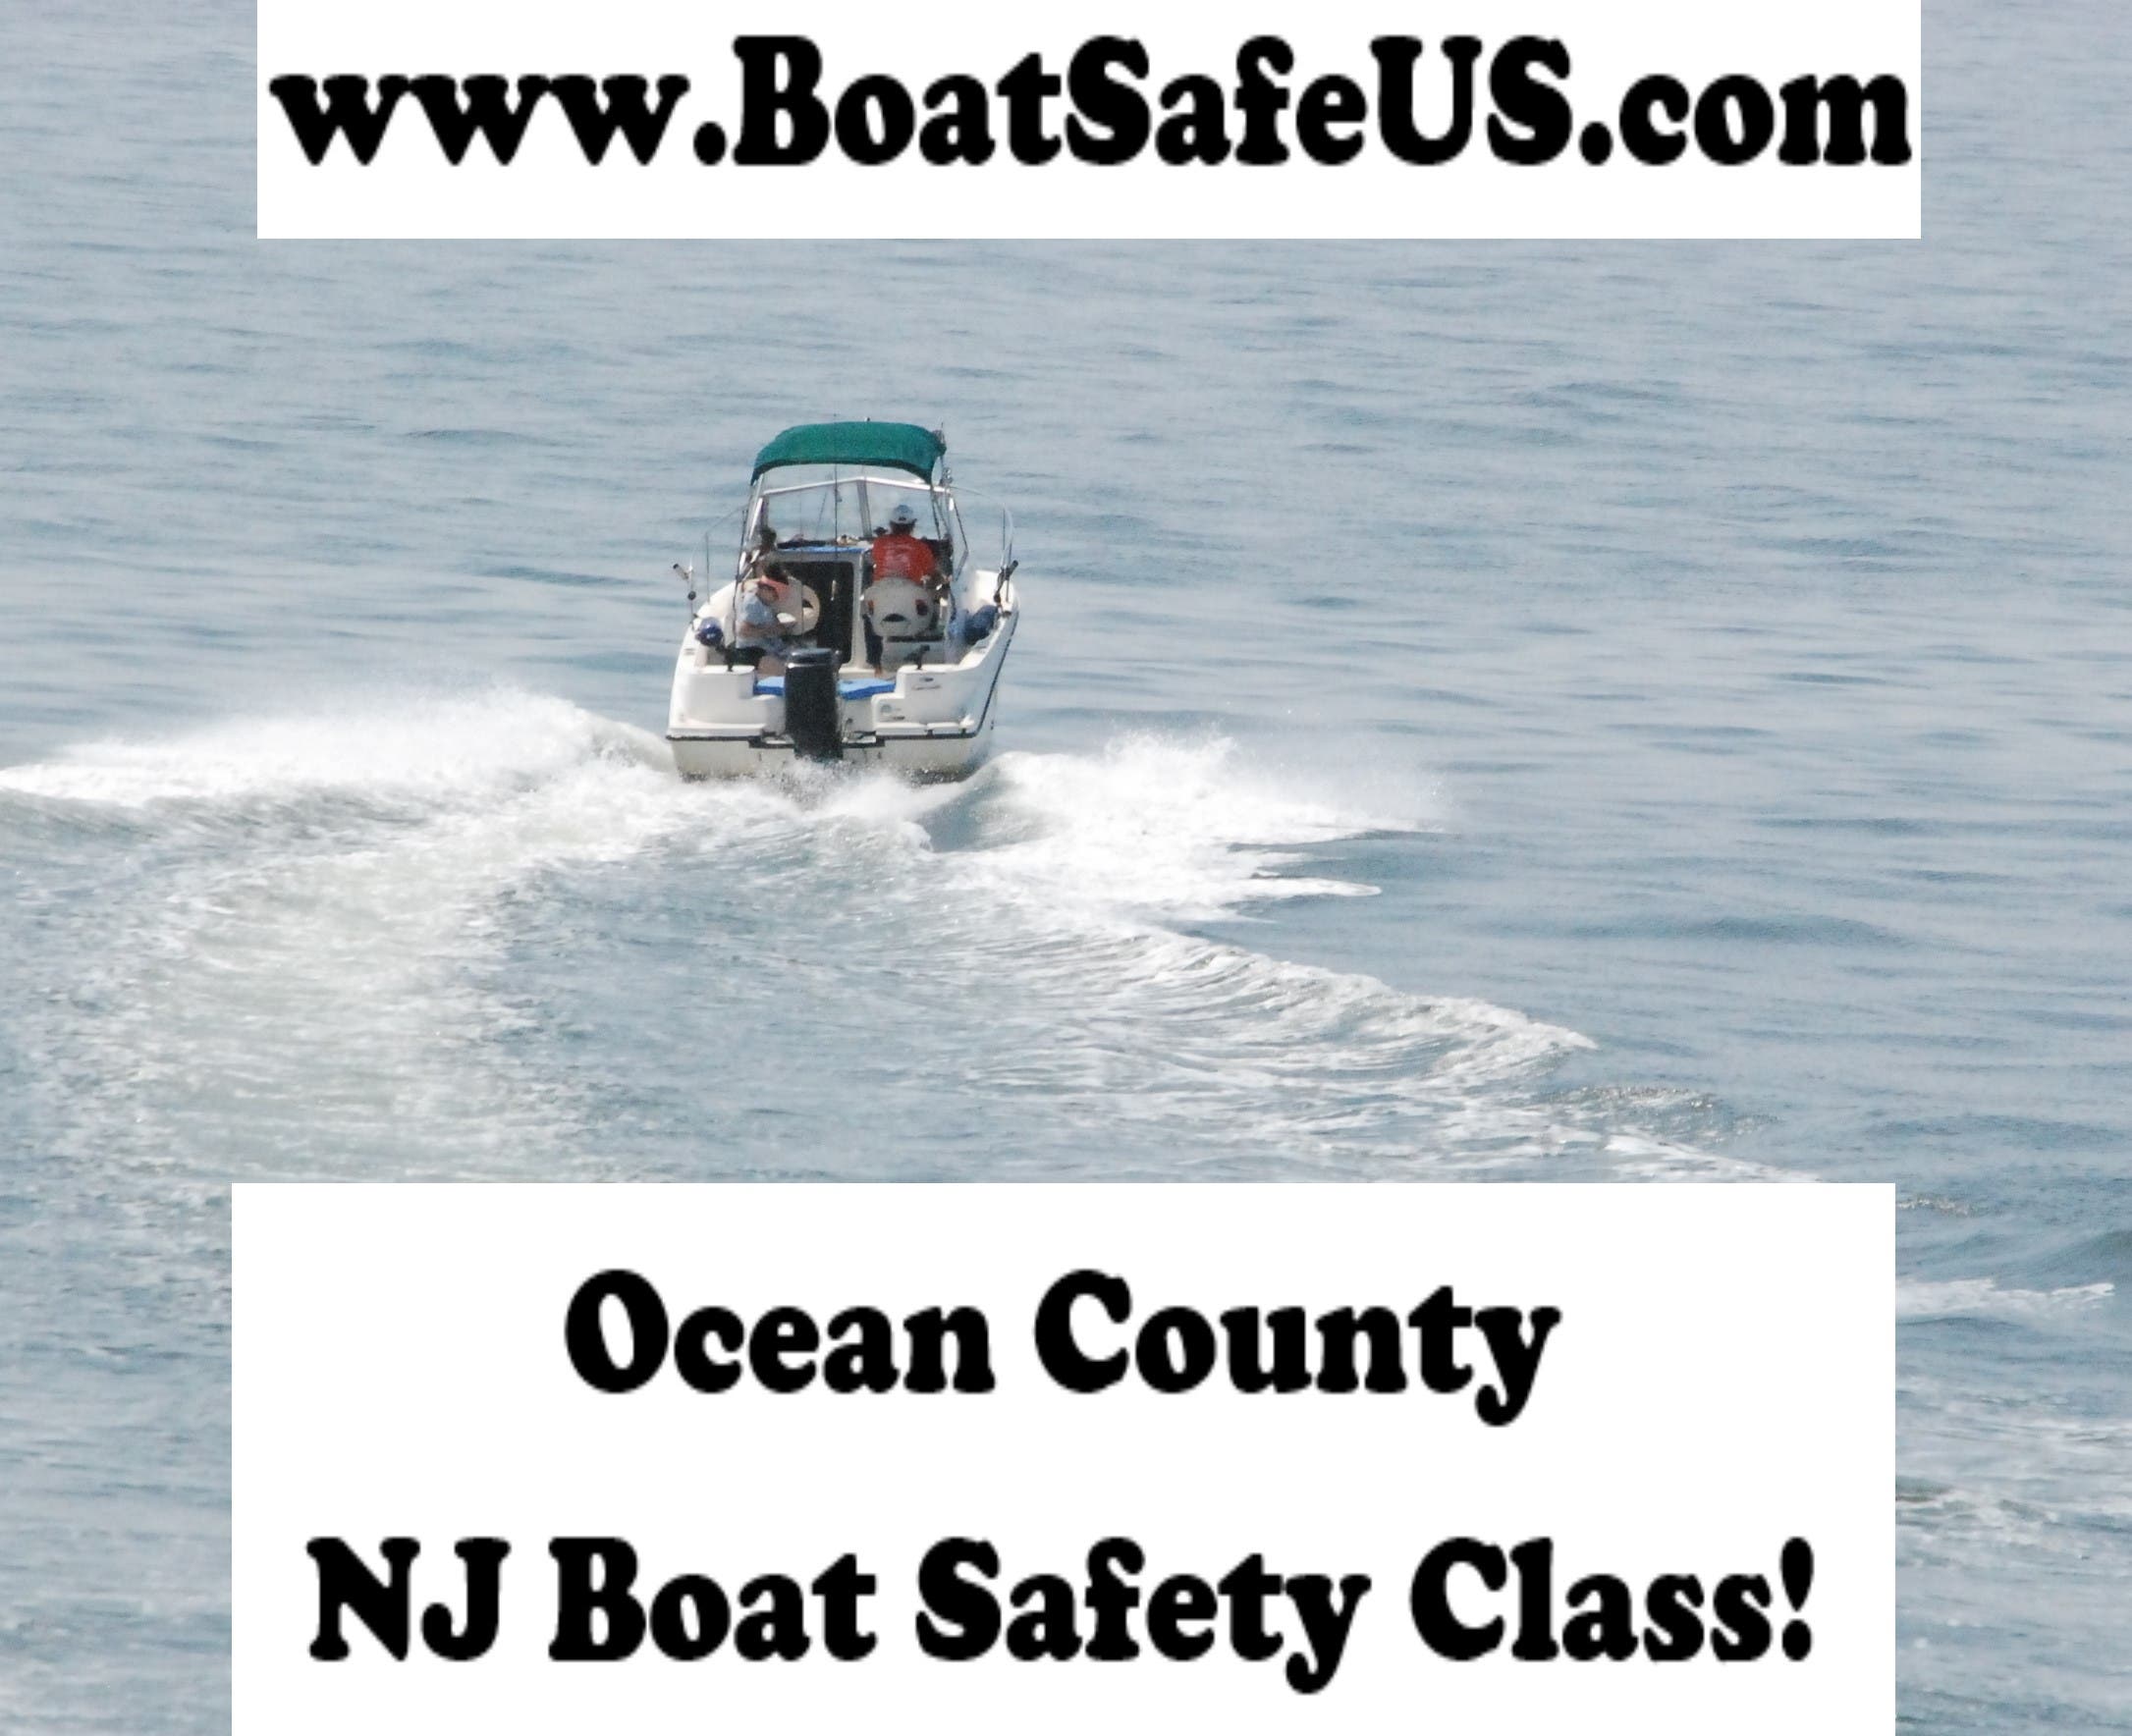 Toms River - NJ Boat Safety Class and Exam (Two Night)